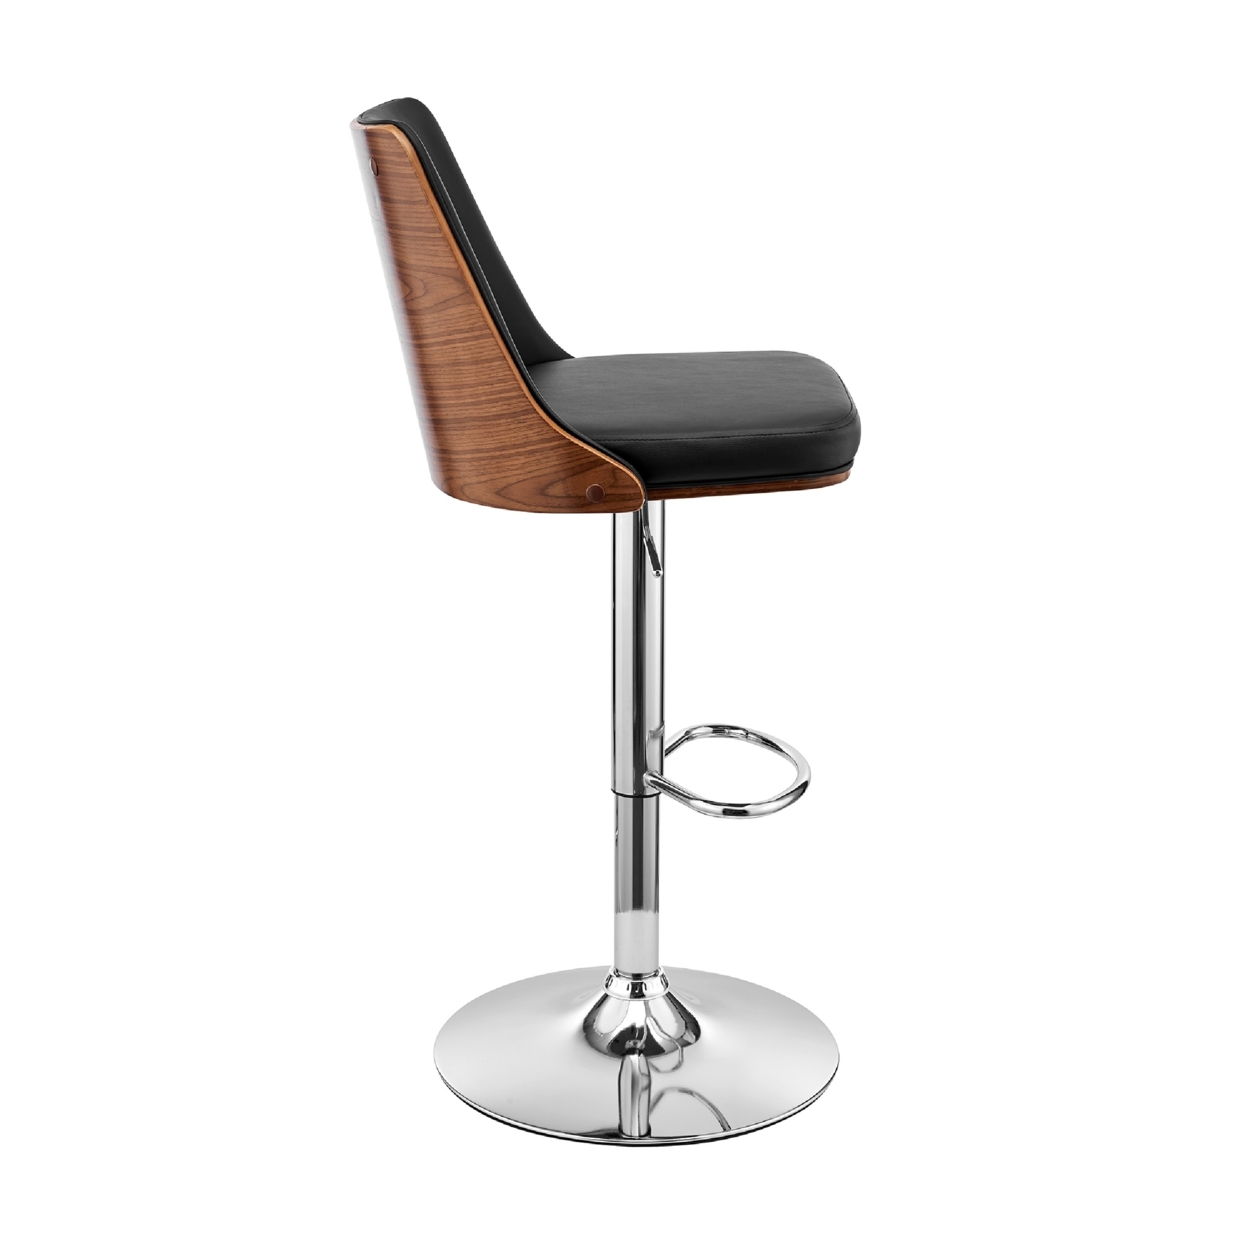 Adjustable Barstool With Faux Leather And Wooden Backing, Black And Brown- Saltoro Sherpi